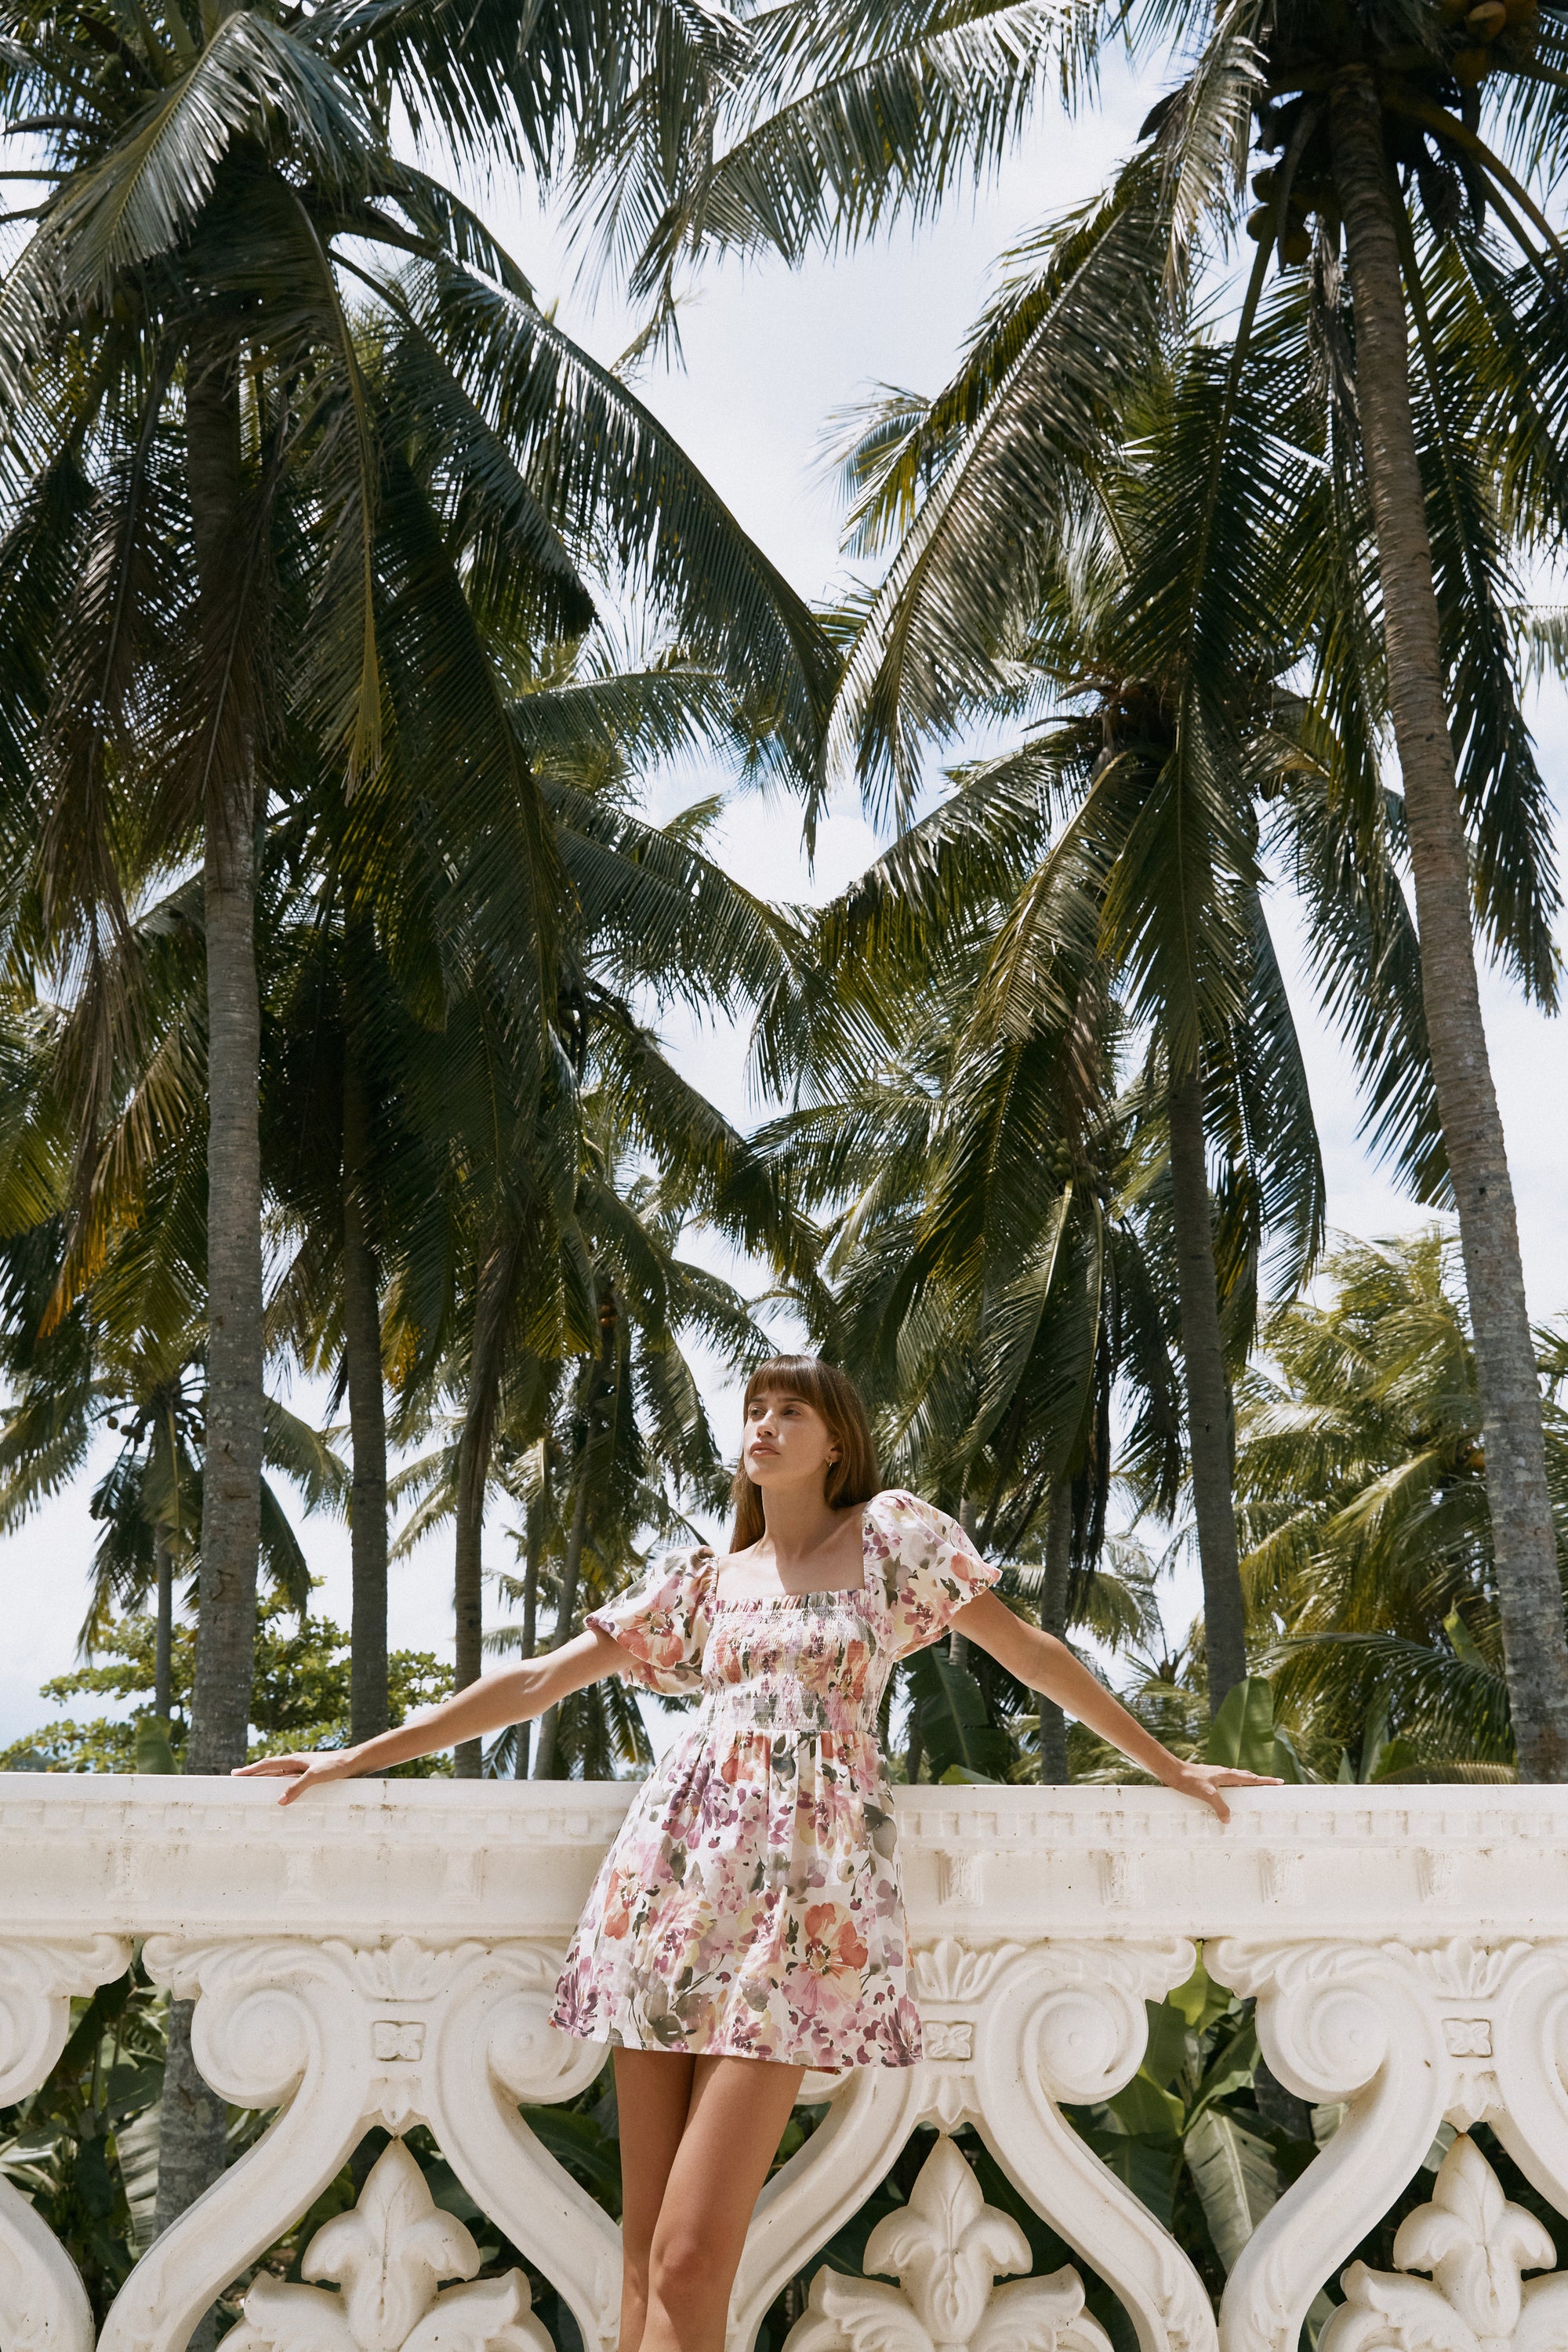 Woman wearing floral printed summer dress leaning on a white balustrade with palm tress at the background